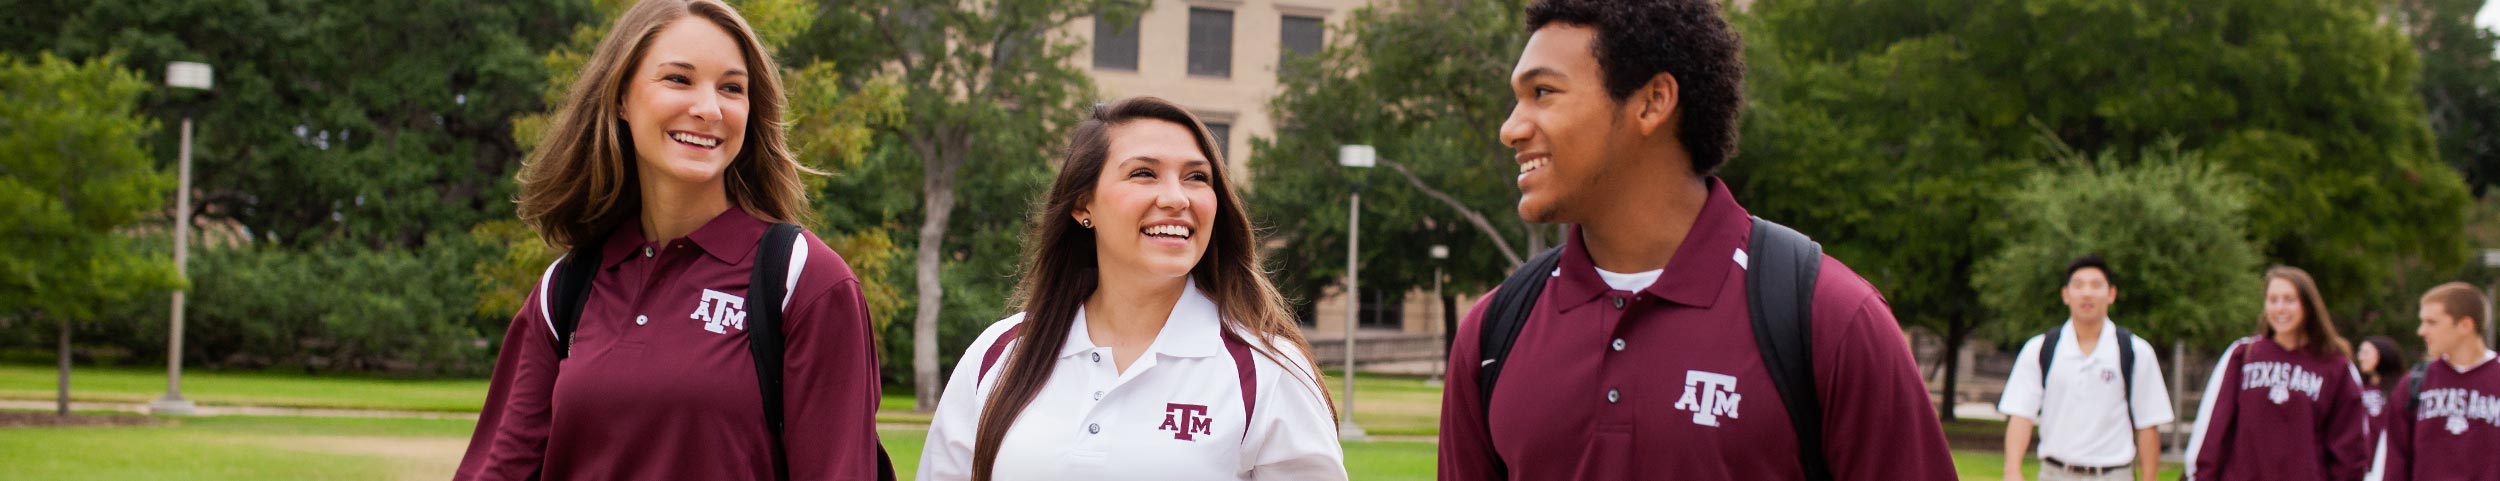 Three students dressed in maroon and white polos walking to class